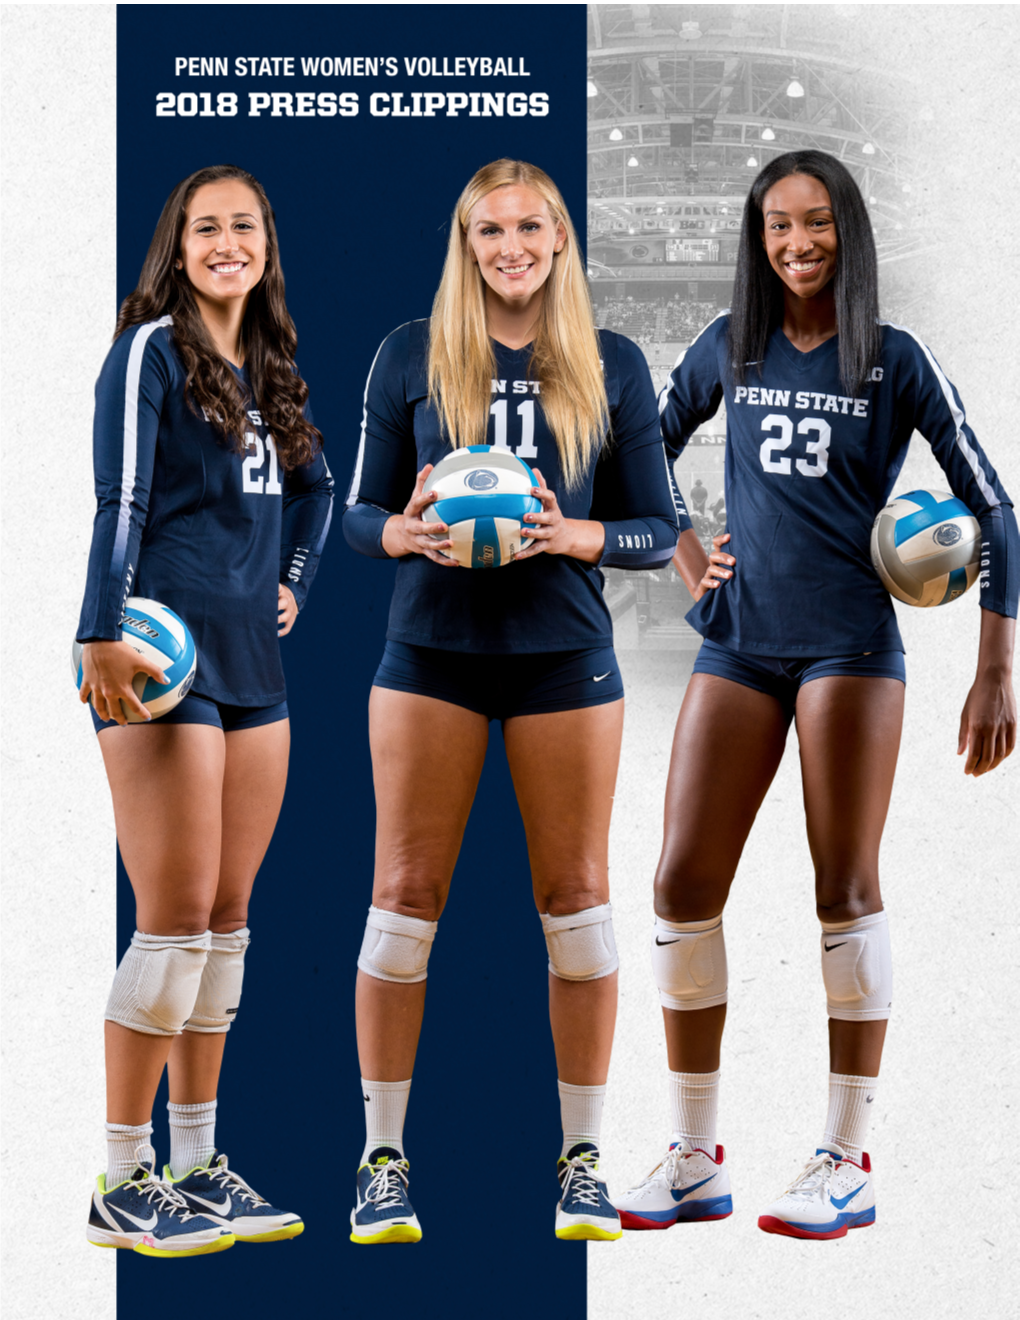 Freshmen Continue to Show Growth for Penn State Women's Volleyball